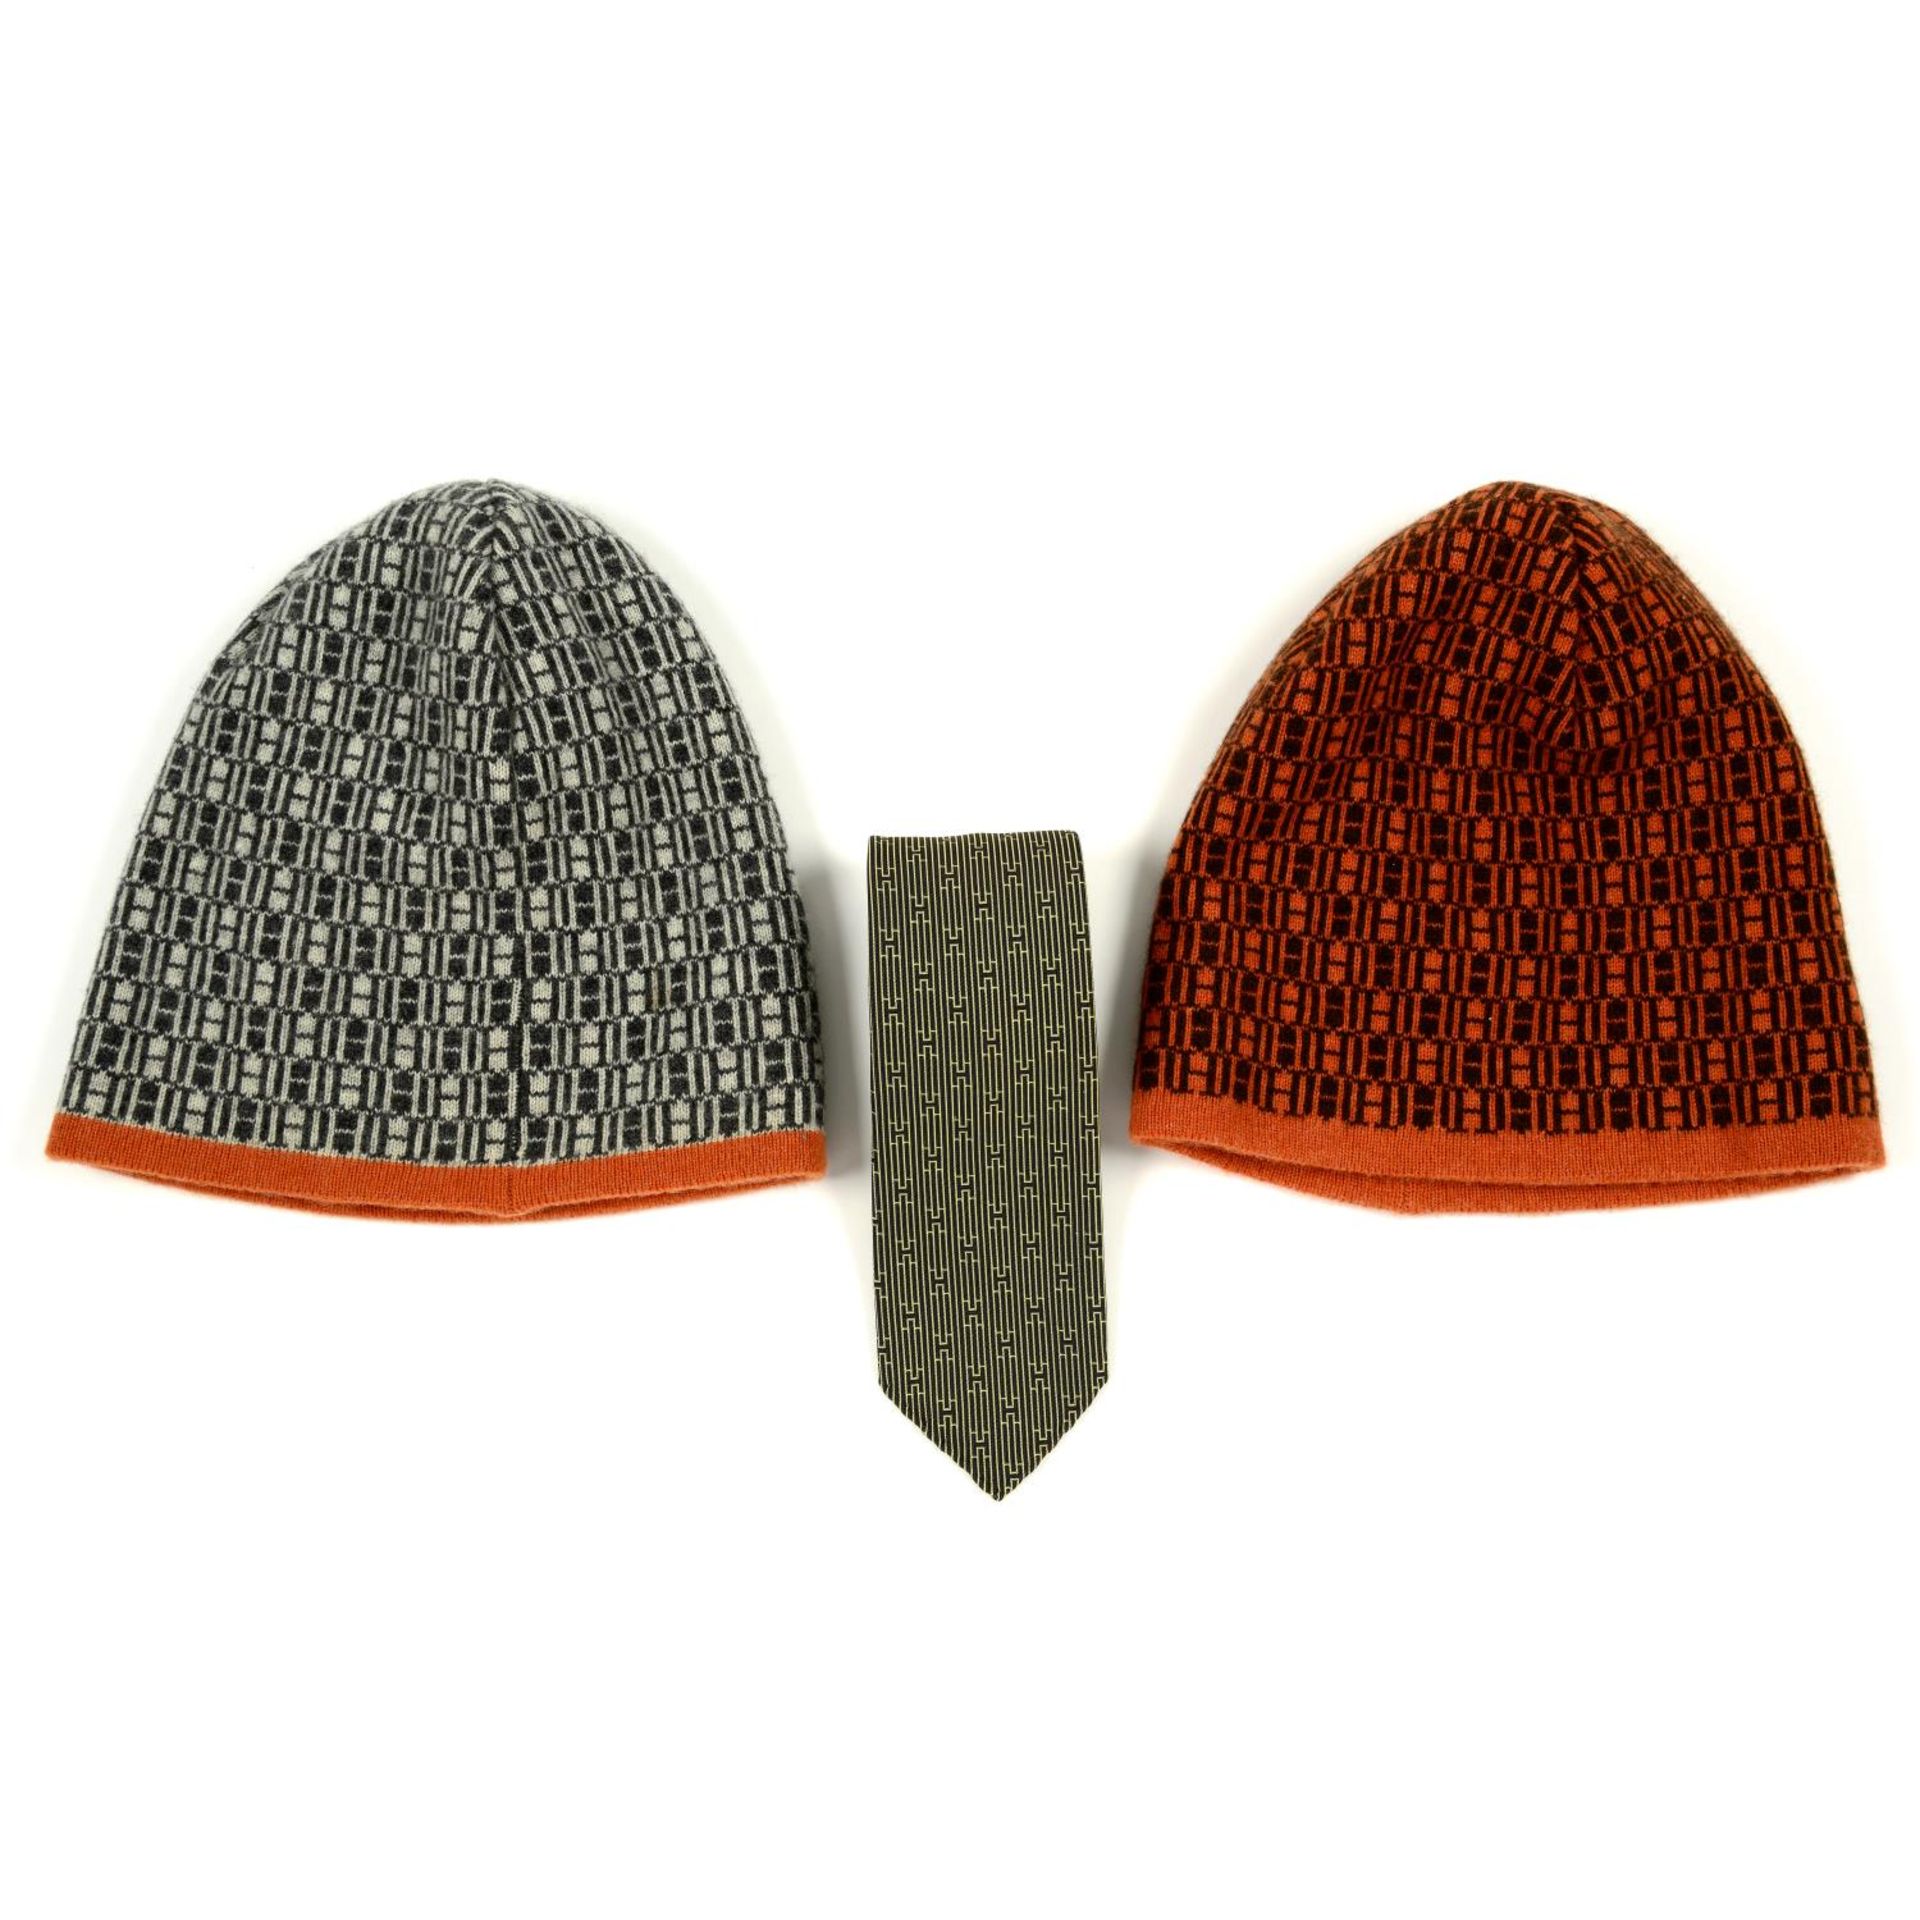 HERMÈS - a silk tie and two wool beanie hats.